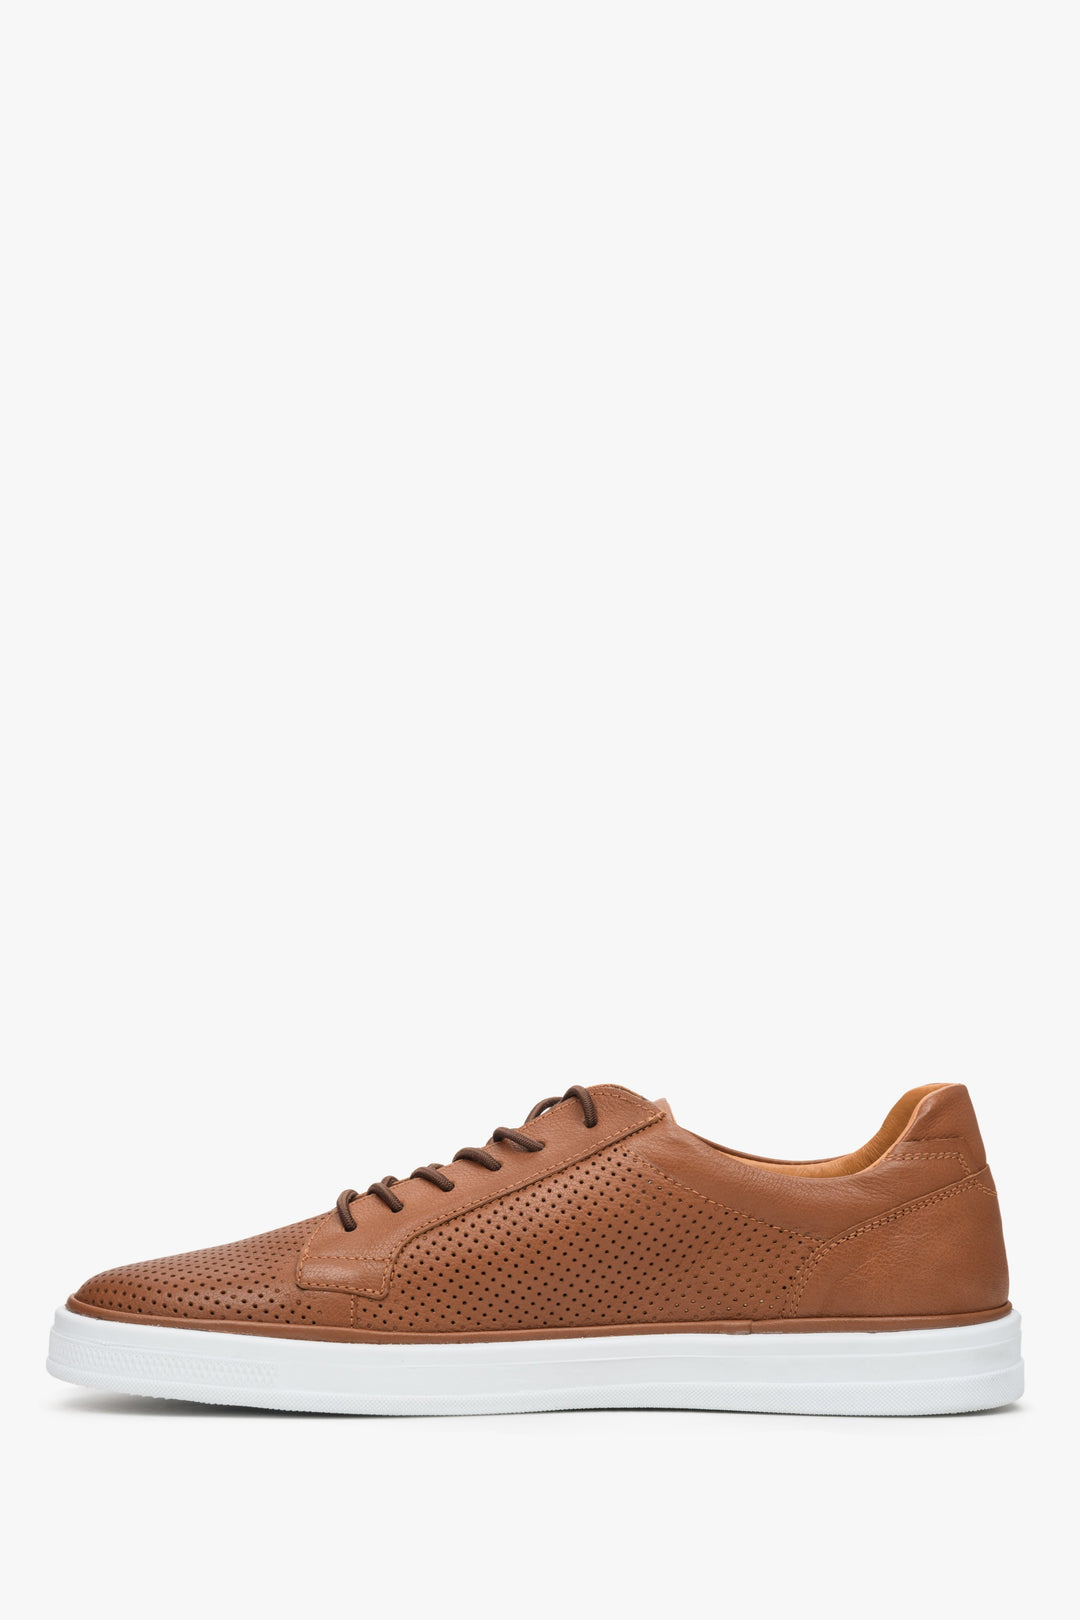 Brown men's perforated sneakers for summer of Estro's new summer collection.